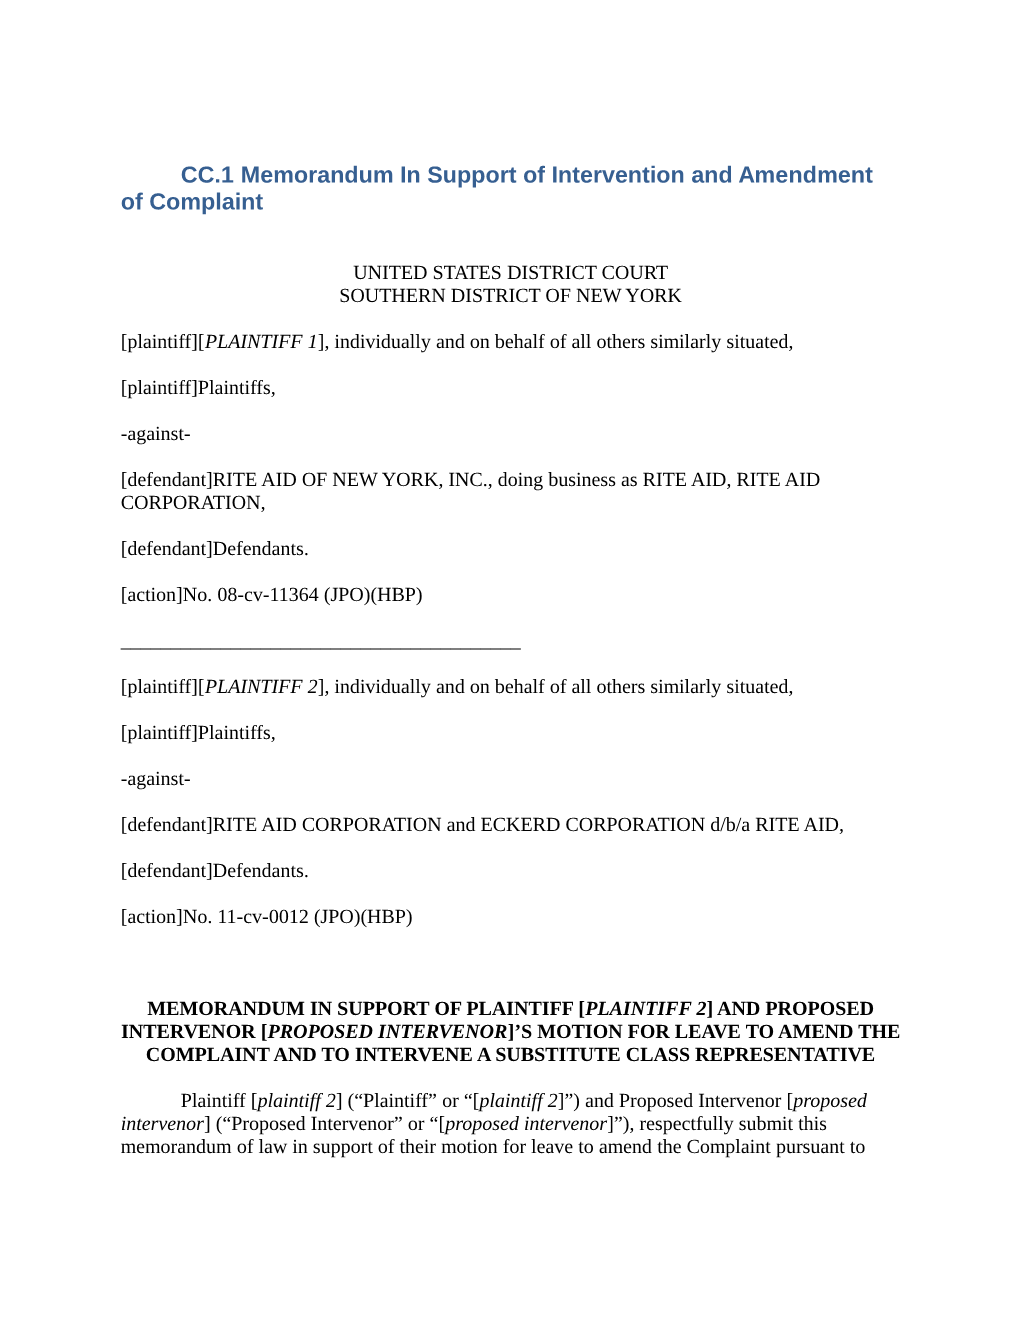 CC.1 Memorandum in Support of Intervention and Amendment of Complaint